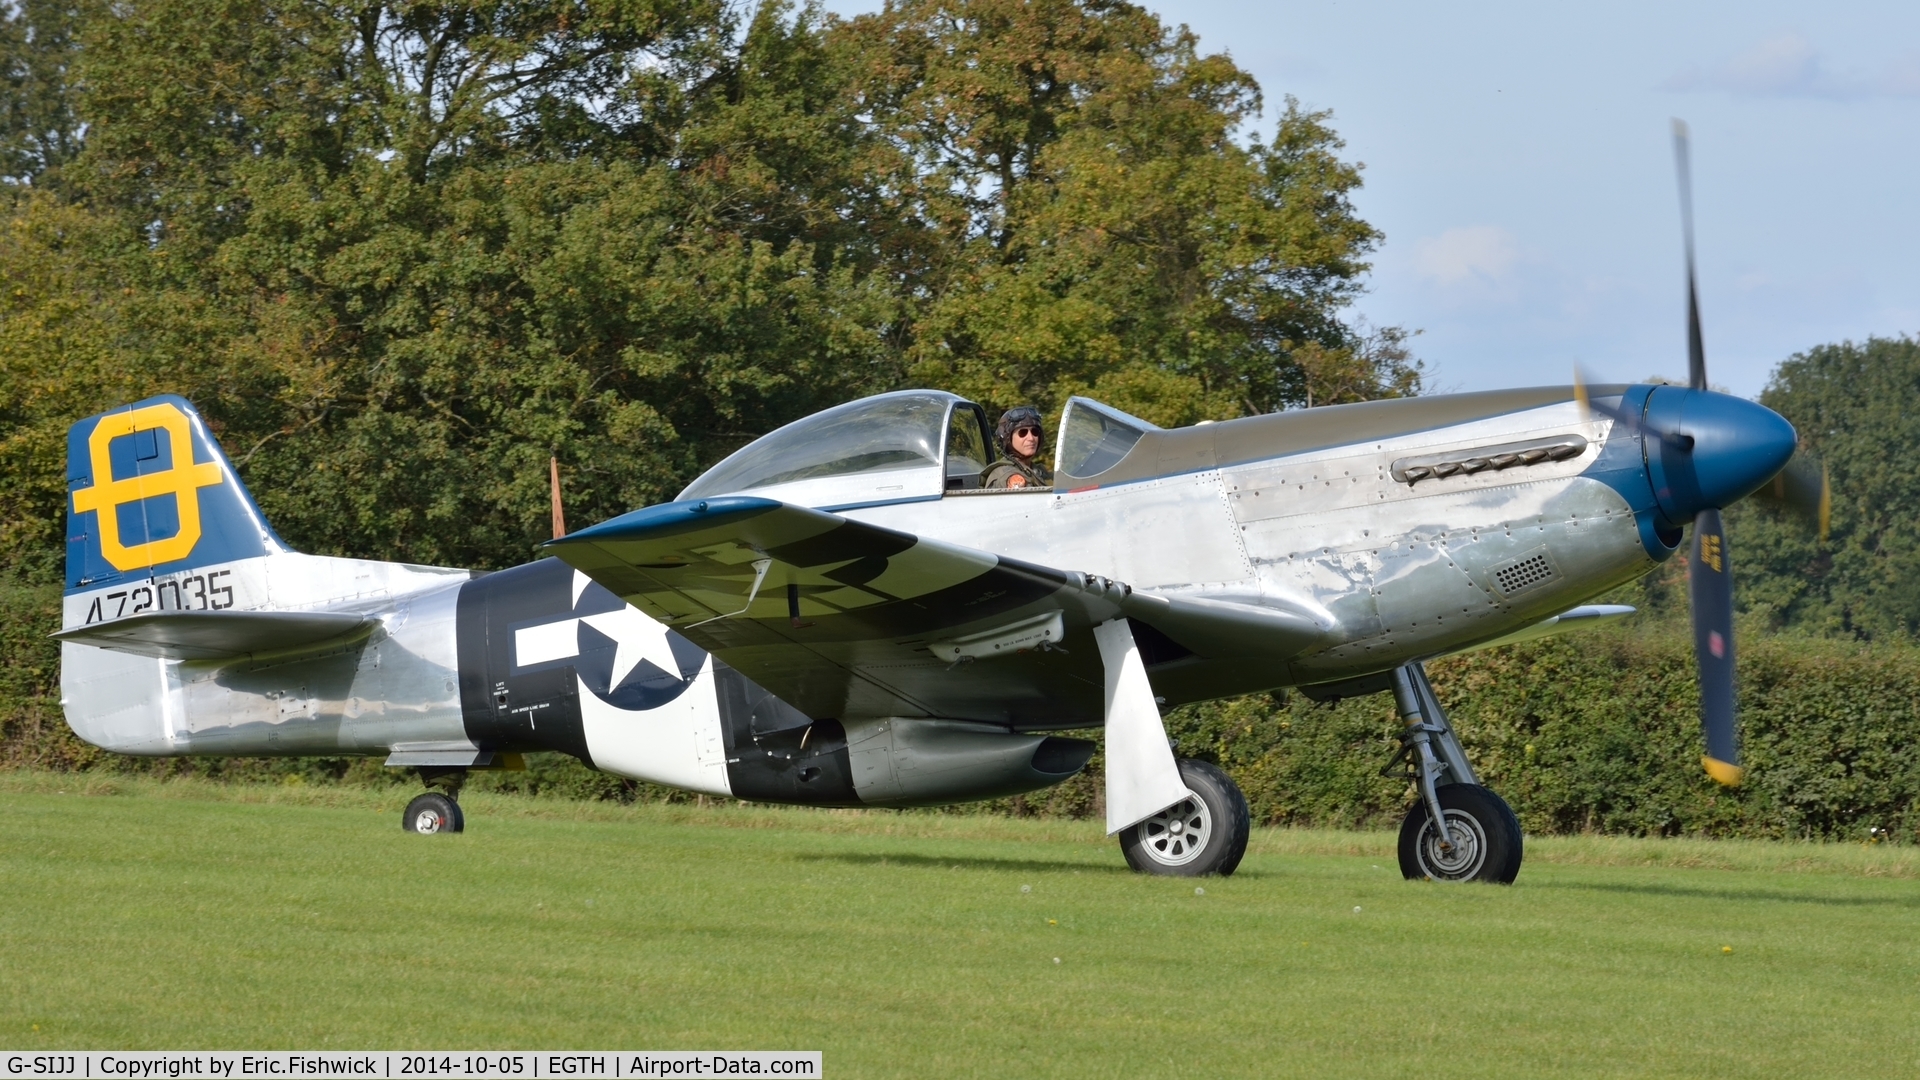 G-SIJJ, 1944 North American P-51D Mustang C/N 122-31894 (44-72035), 3. 'Jumpin' Jacques' (Hanger 11) preparing to depart the rousing season finale Race Day Air Show at Shuttleworth, Oct. 2014.